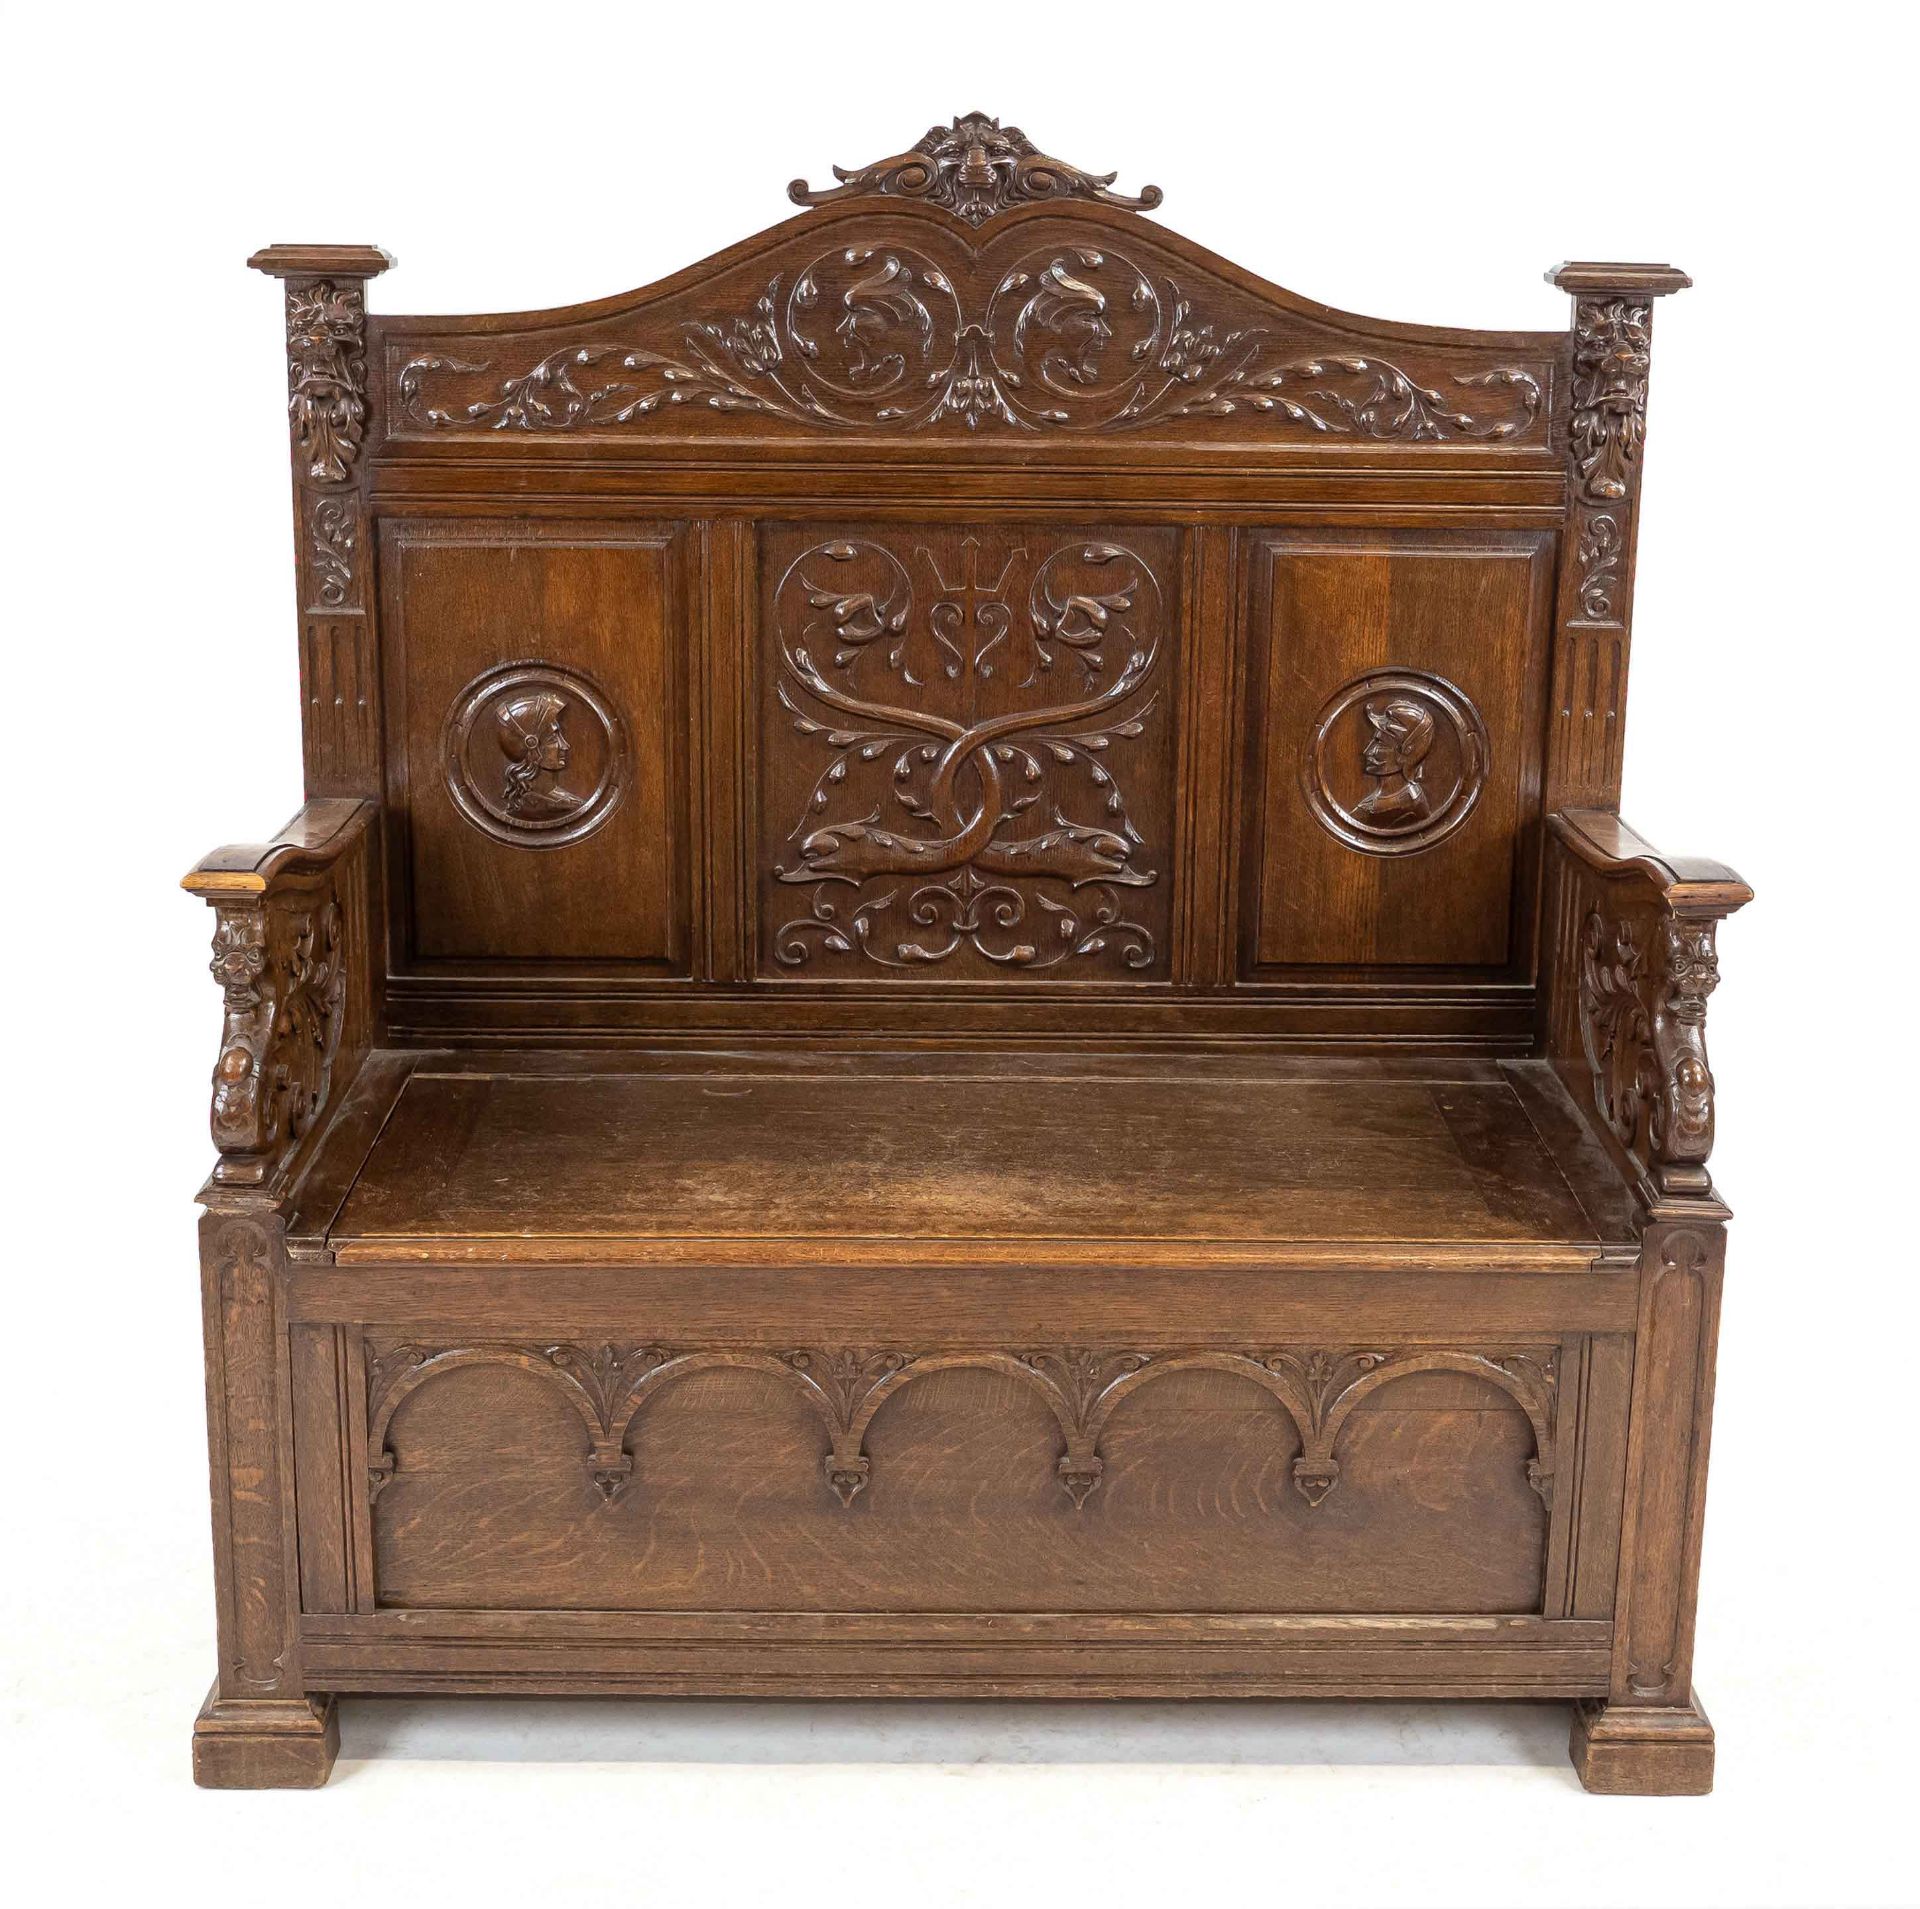 Renaissance-style chest bench, 19th century, solid oak, carving typical for the style, 135 x 122 x